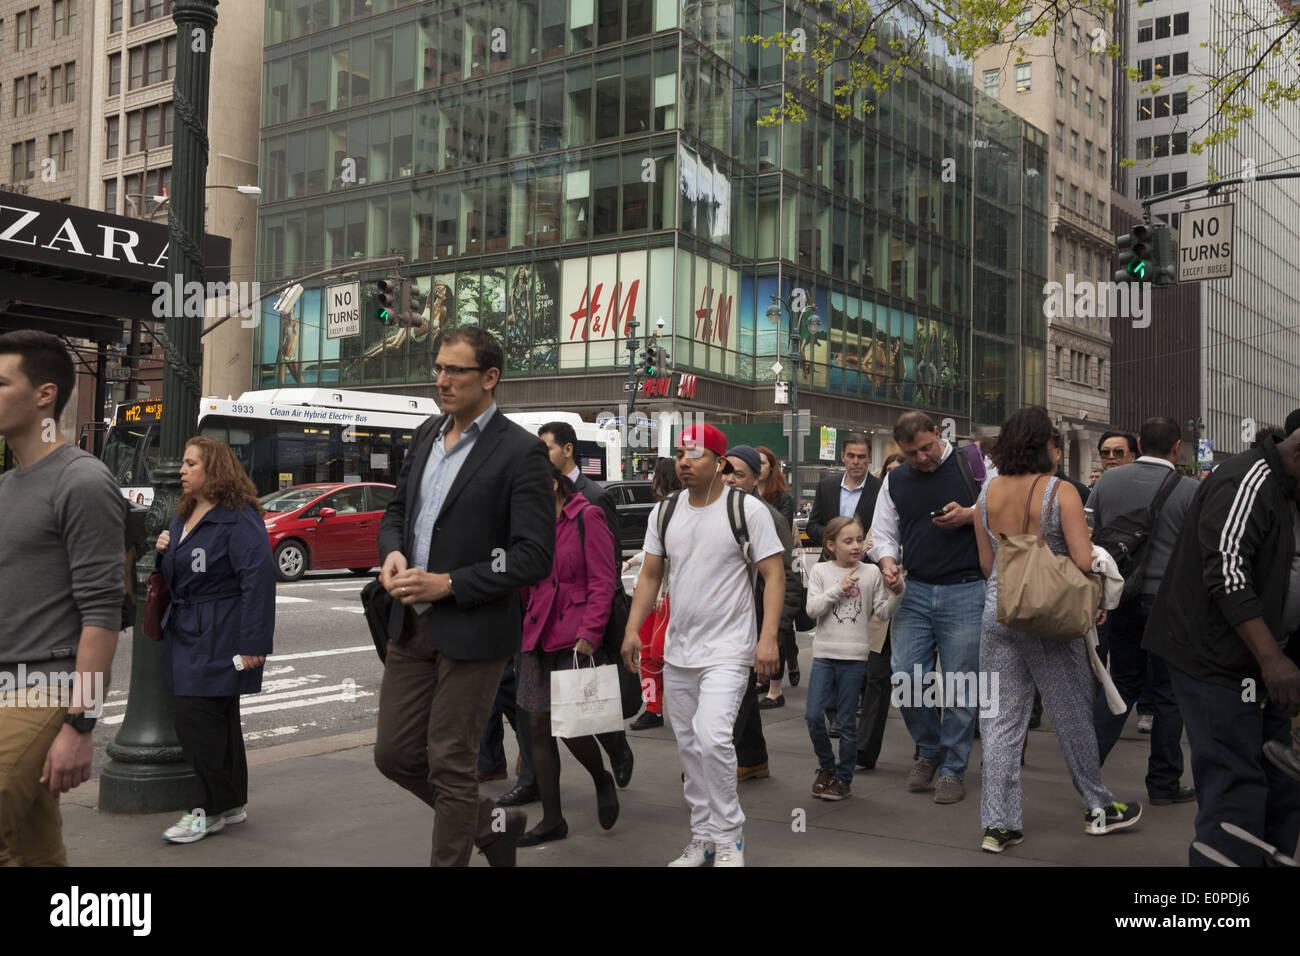 42nd St. near 5th Ave is always crowded with tourists, New Yorkers & office workers. NYC. Stock Photo